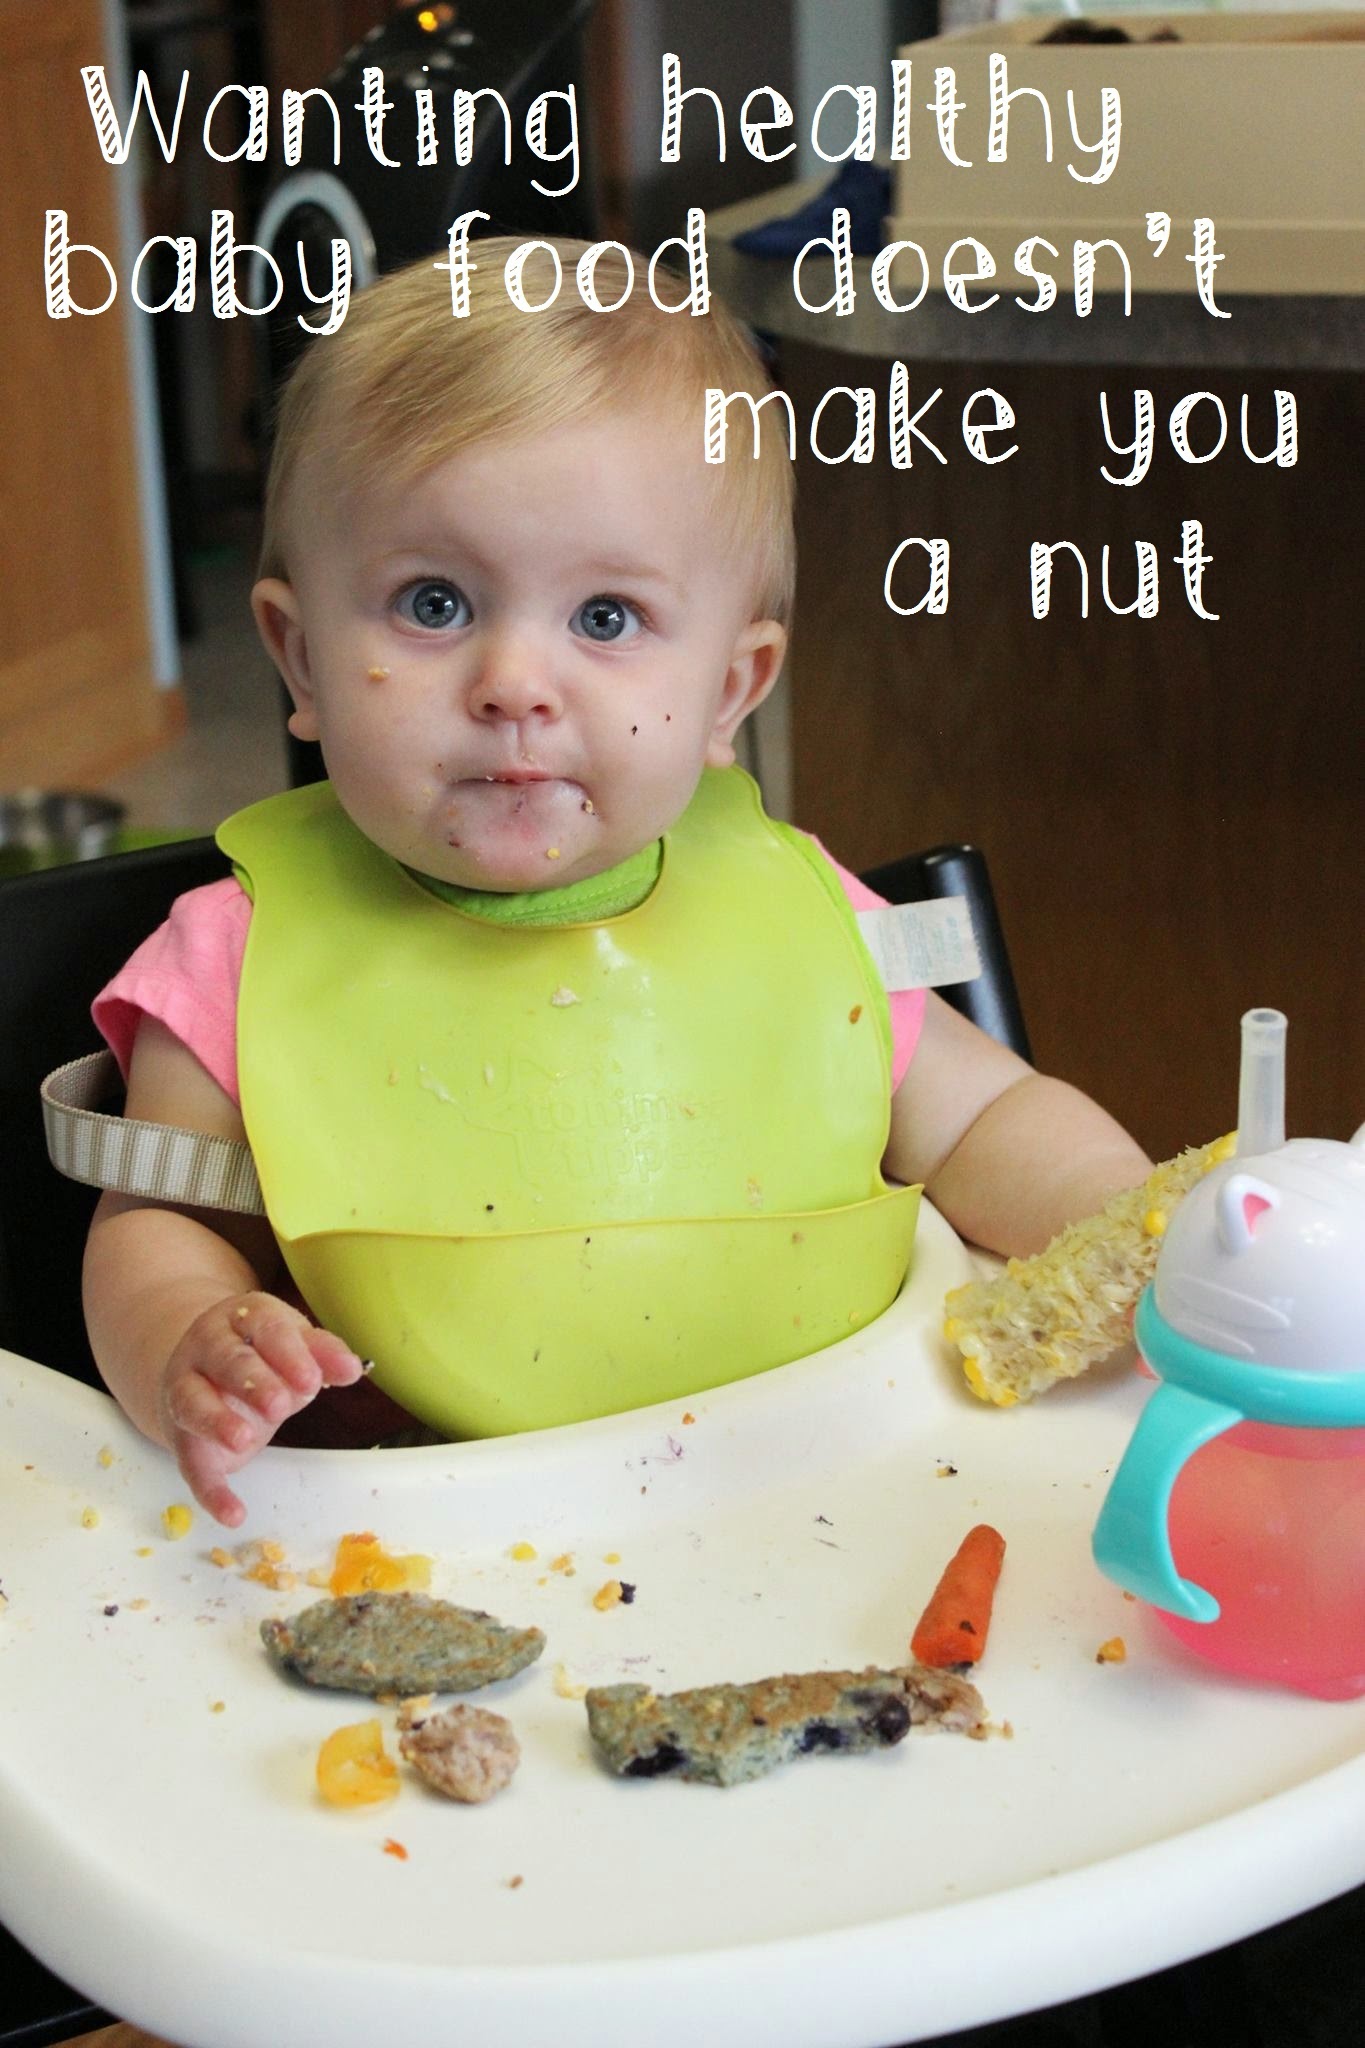 Wanting healthy baby food doesn't make you a nut